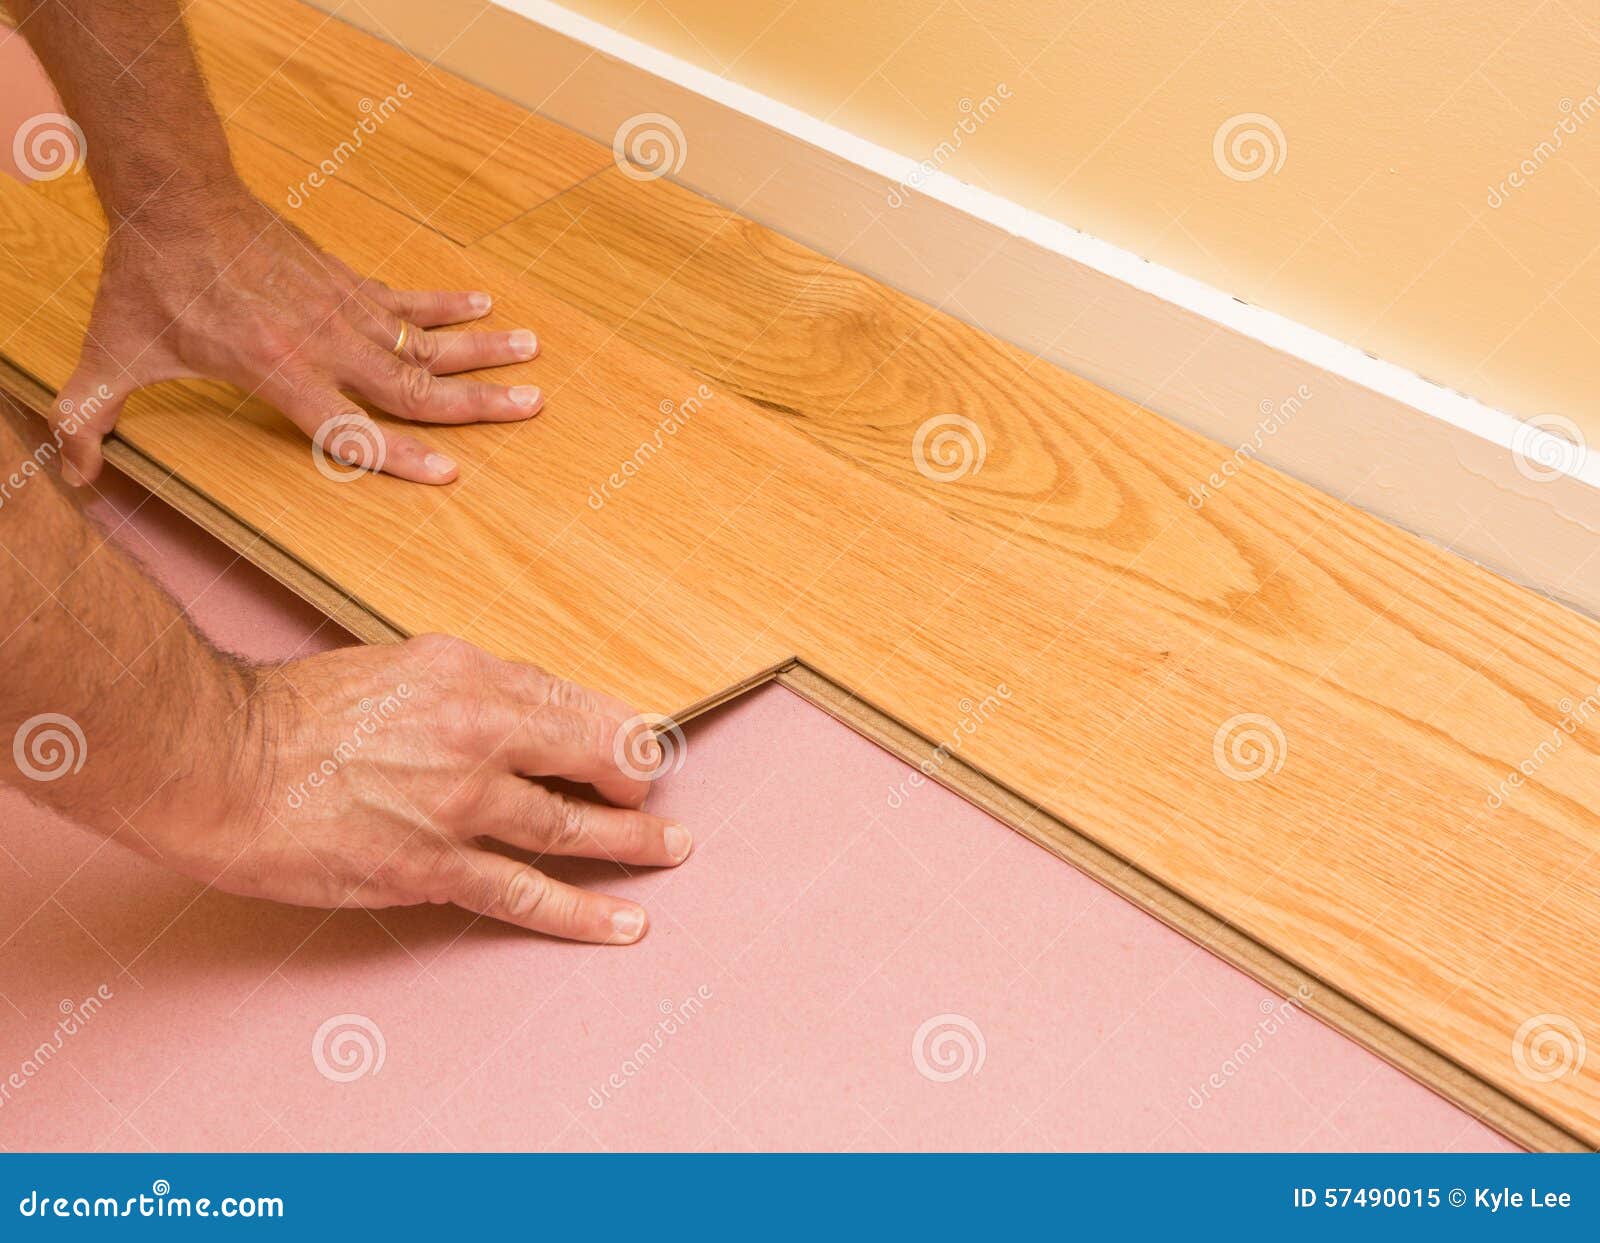 144 Engineered Flooring Wood Photos - Free & Royalty-Free Stock Photos from  Dreamstime